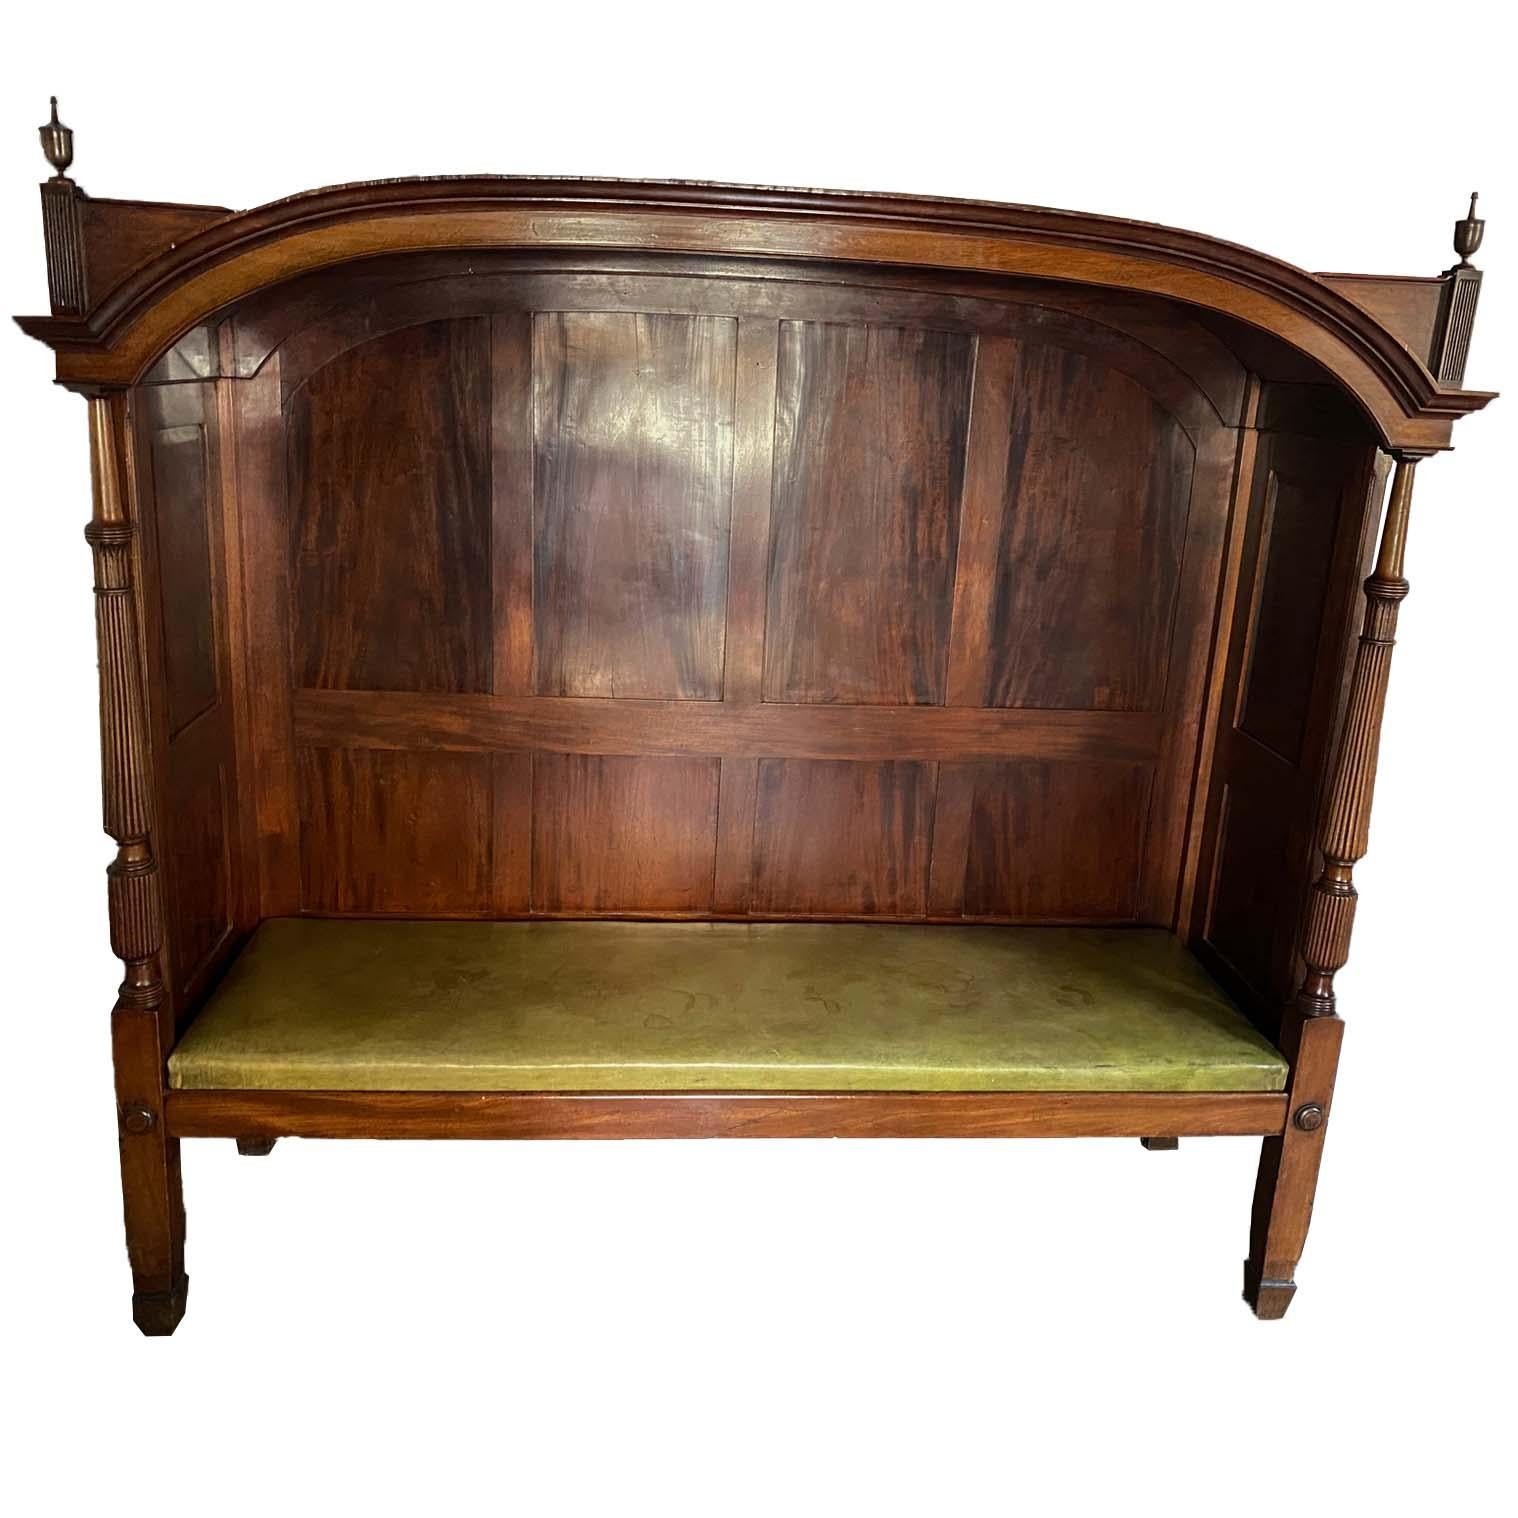 A unique antique hall bench with a seat area of 72